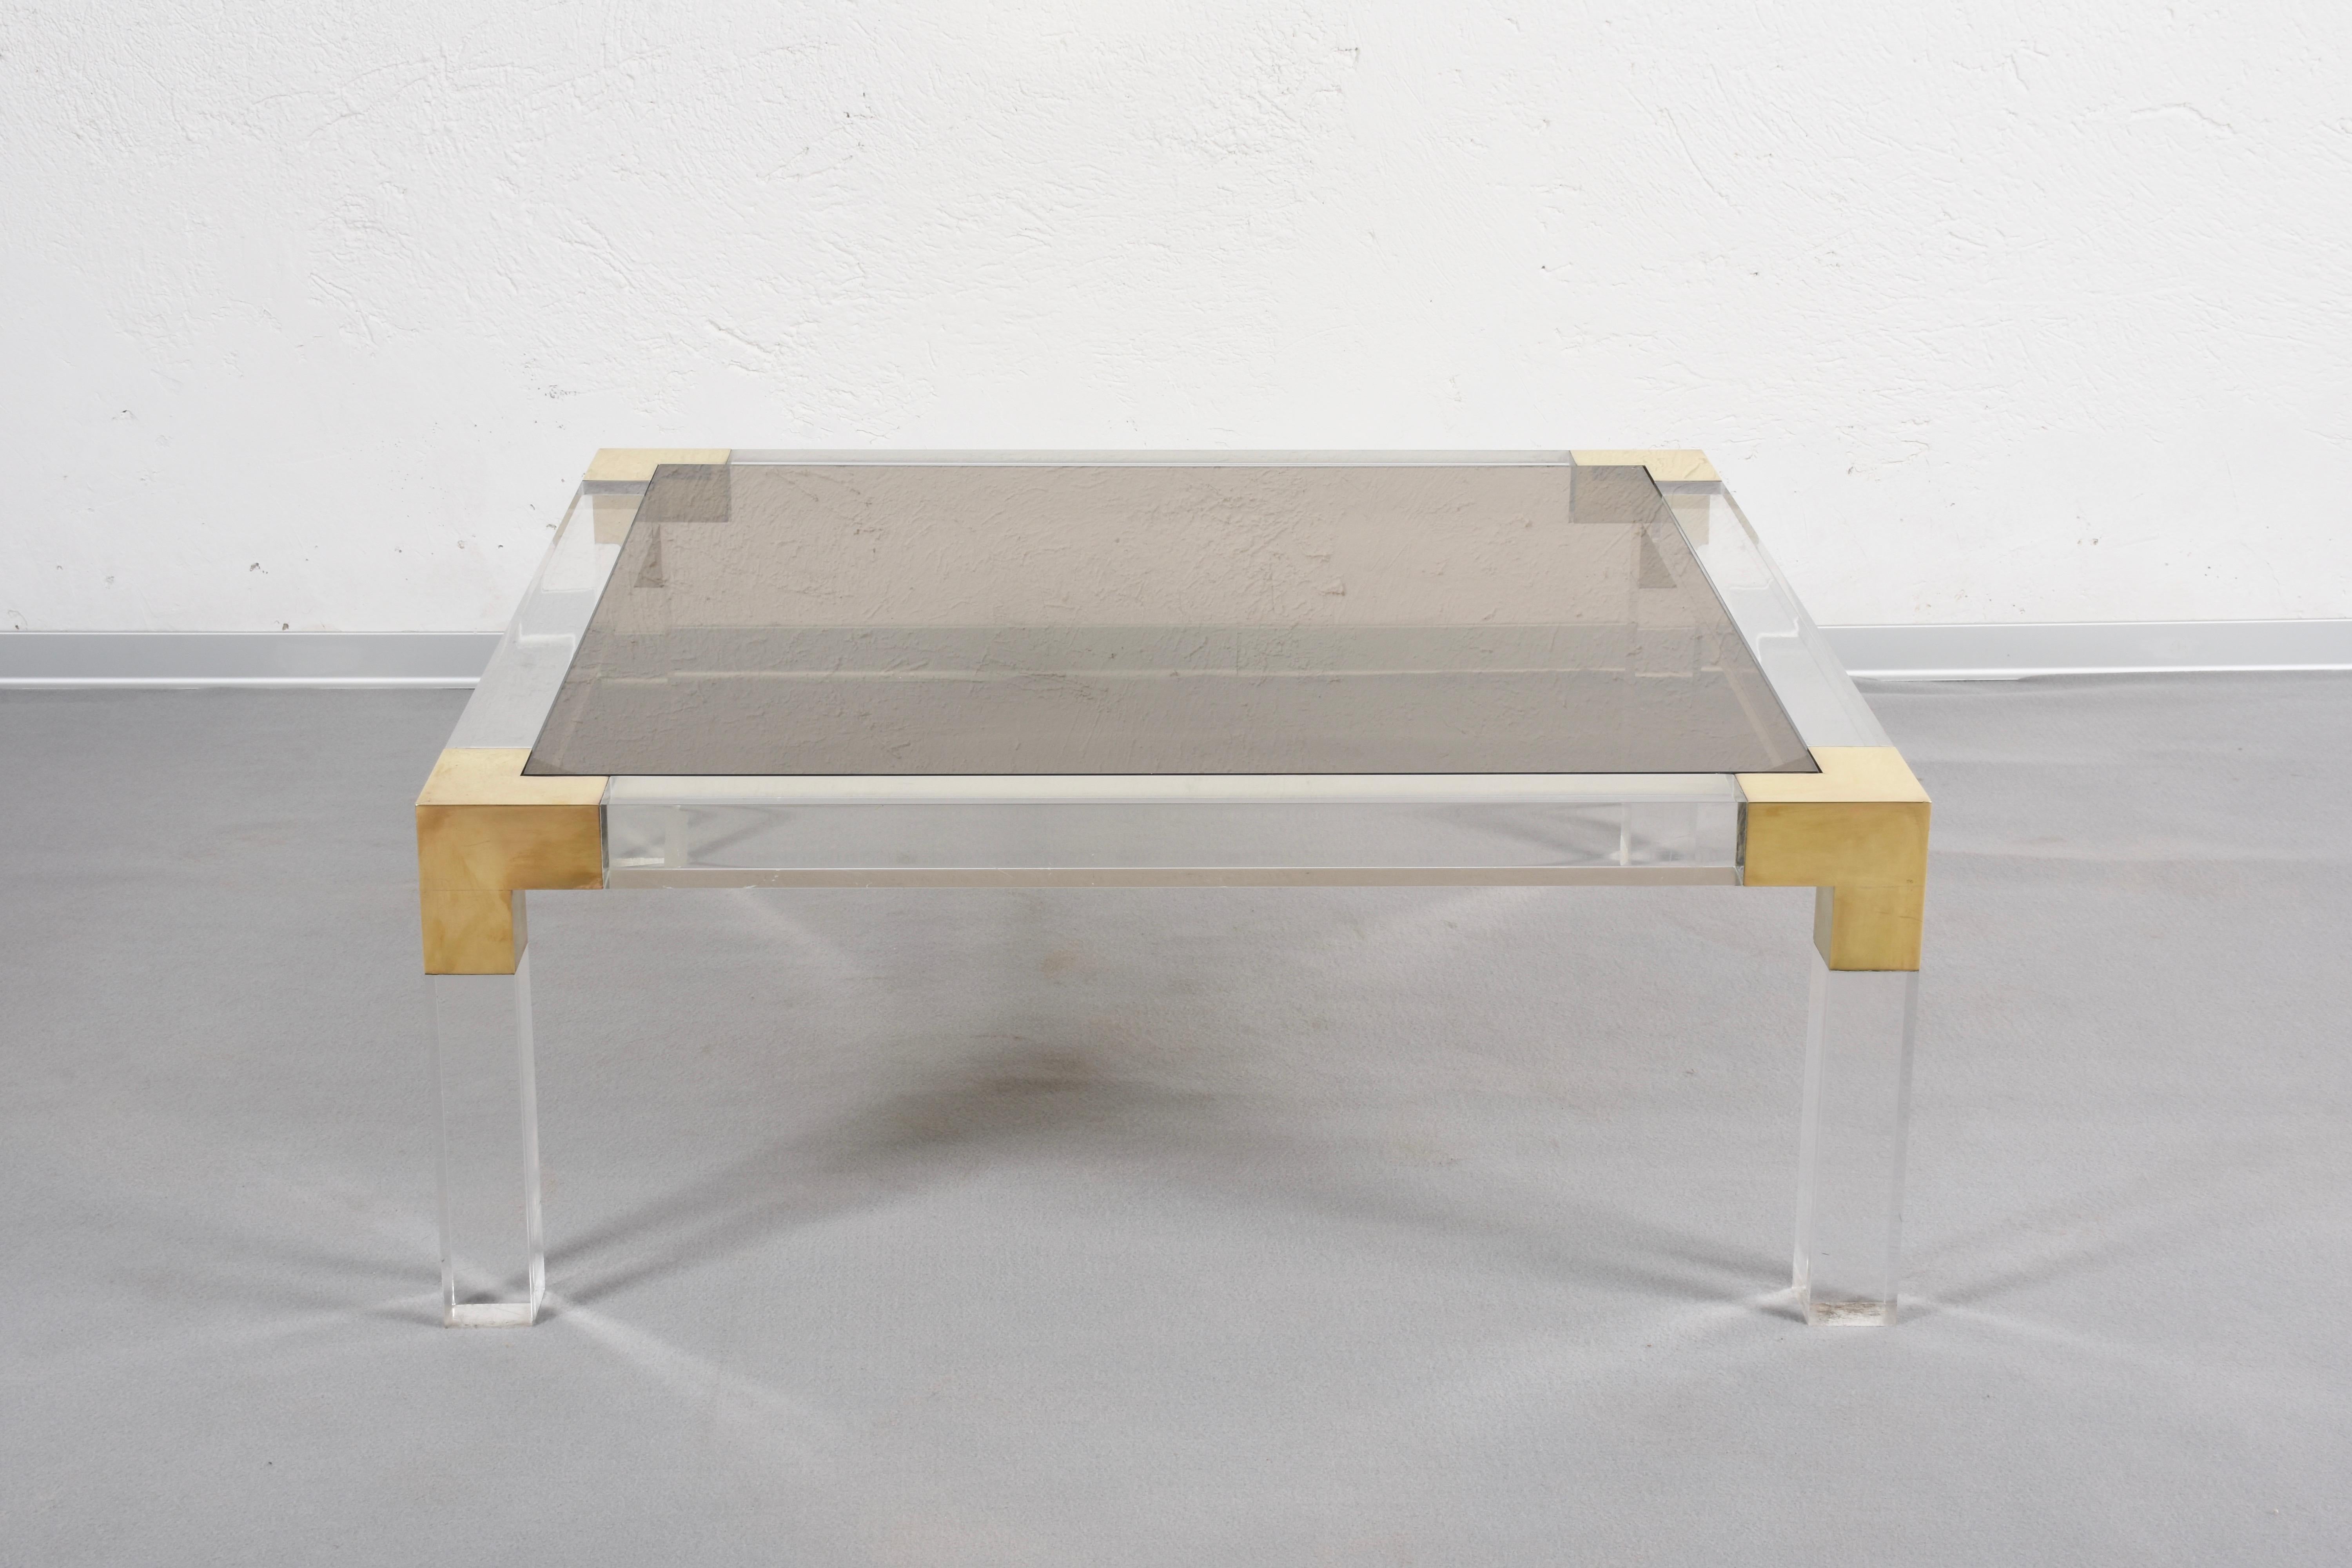 Late 20th Century Midcentury Square Coffee Table in Brass and Lucite, Smoked Glass Top Italy 1970s